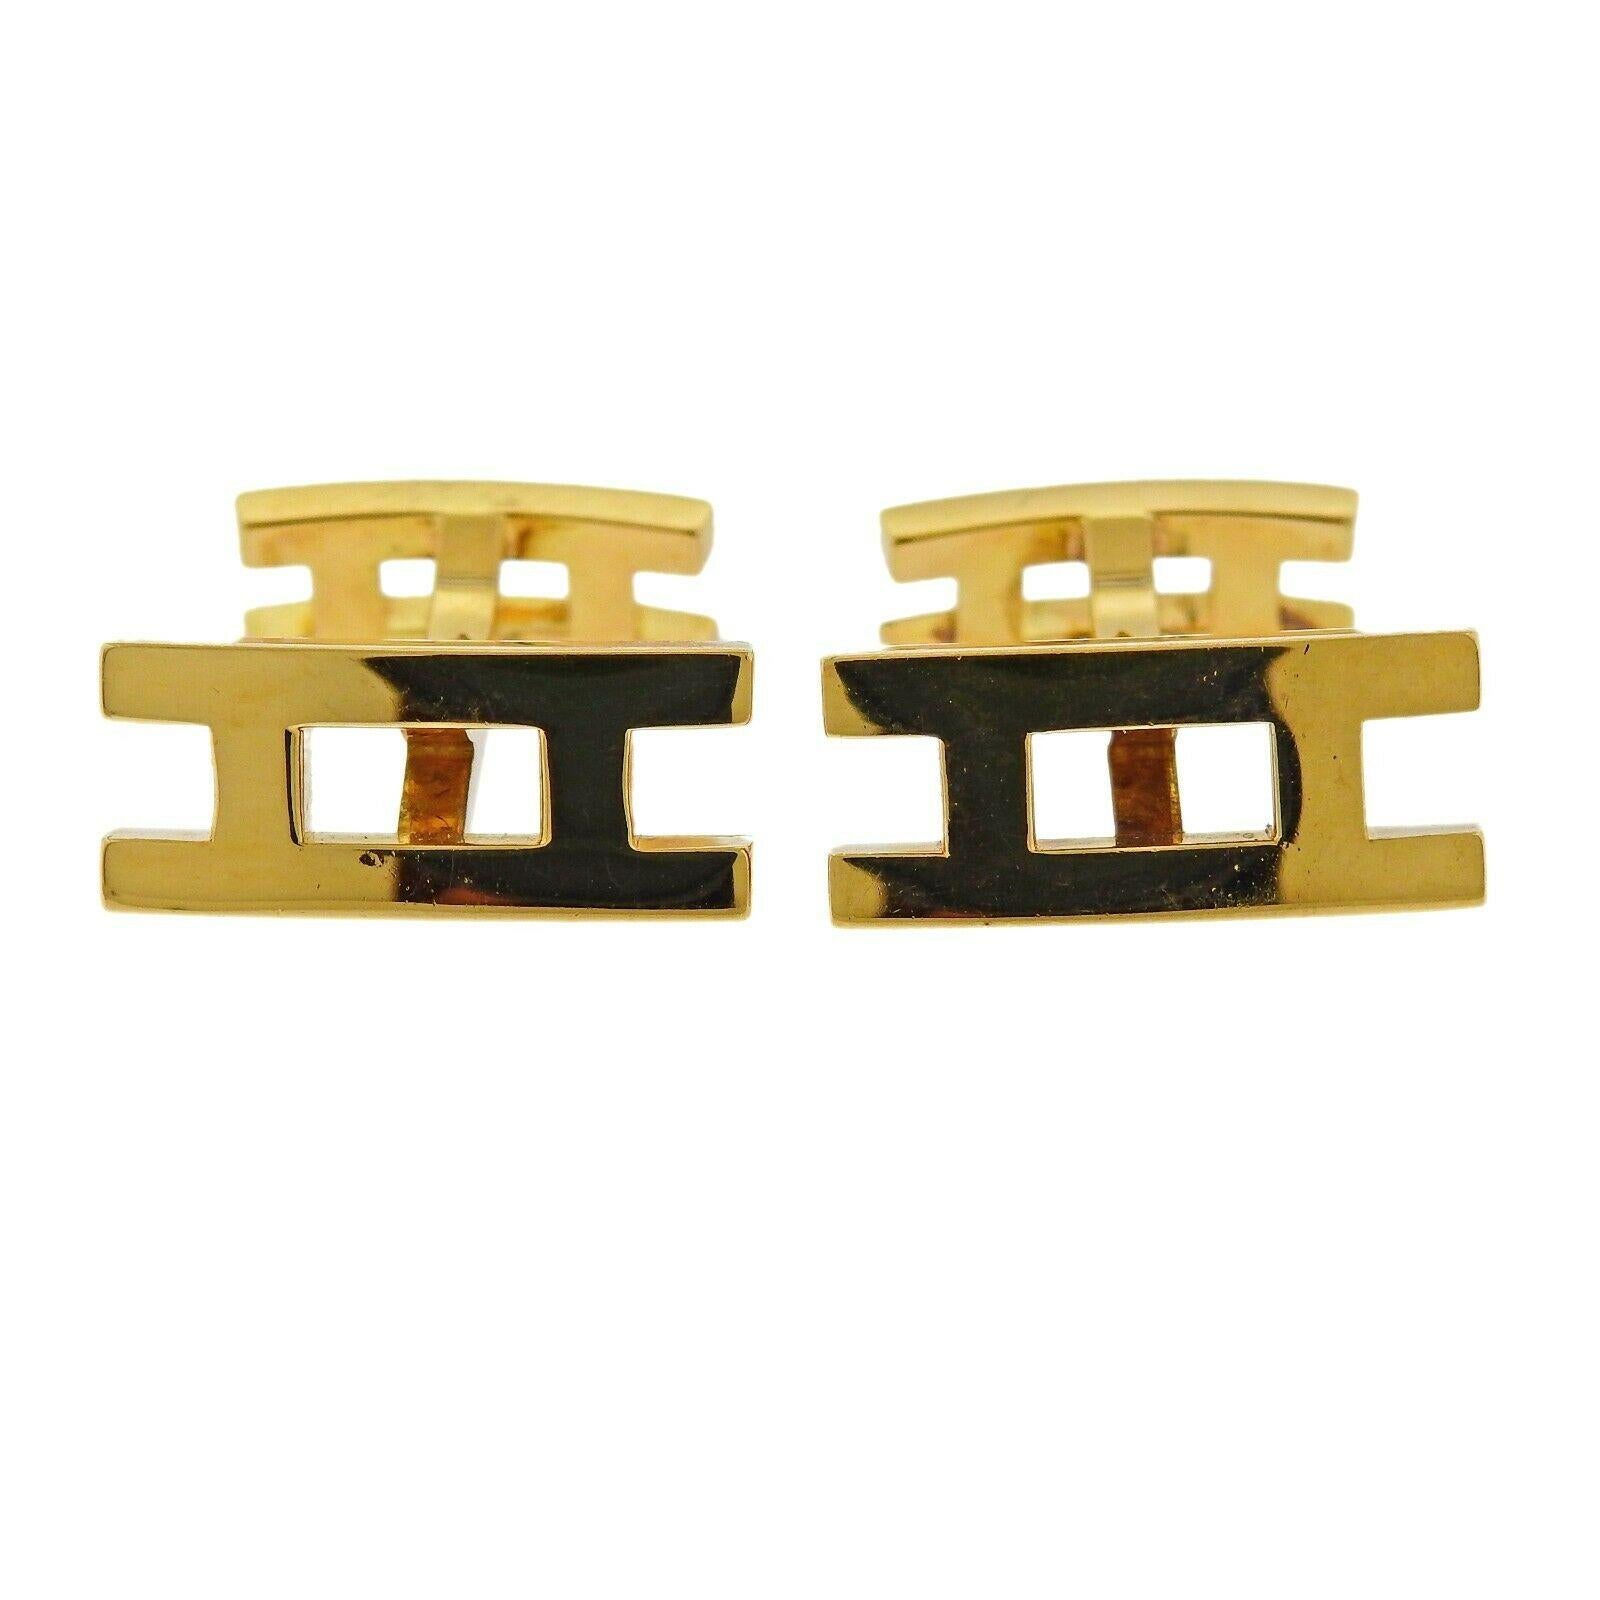 18k yellow gold H logo cufflinks by Hermes. Cufflinks measure 18mm x 8mm. Weight is 10.6 grams. Marked: French mark, Hermes, Au750, 89521.